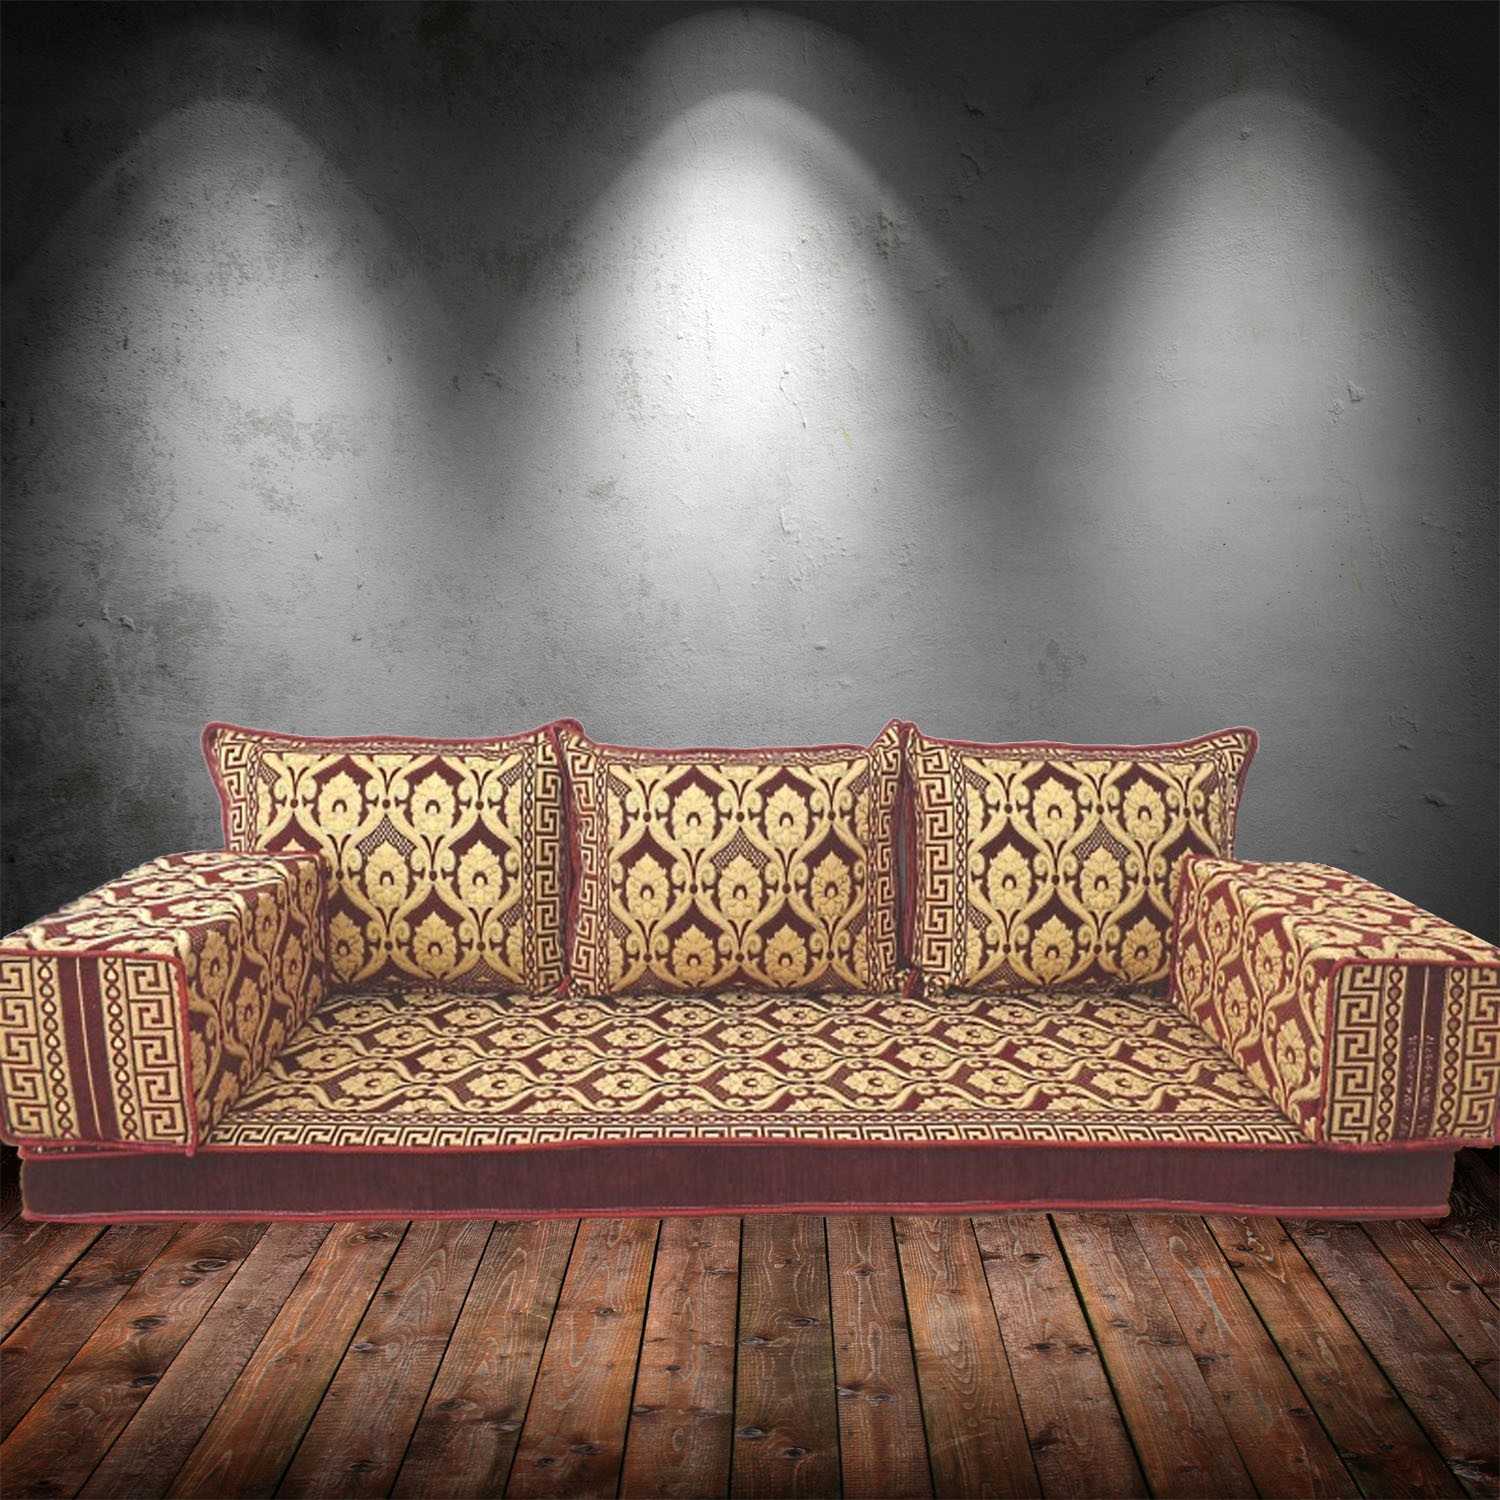 Floral-6 Three Seater Majlis Floor Sofa Couch